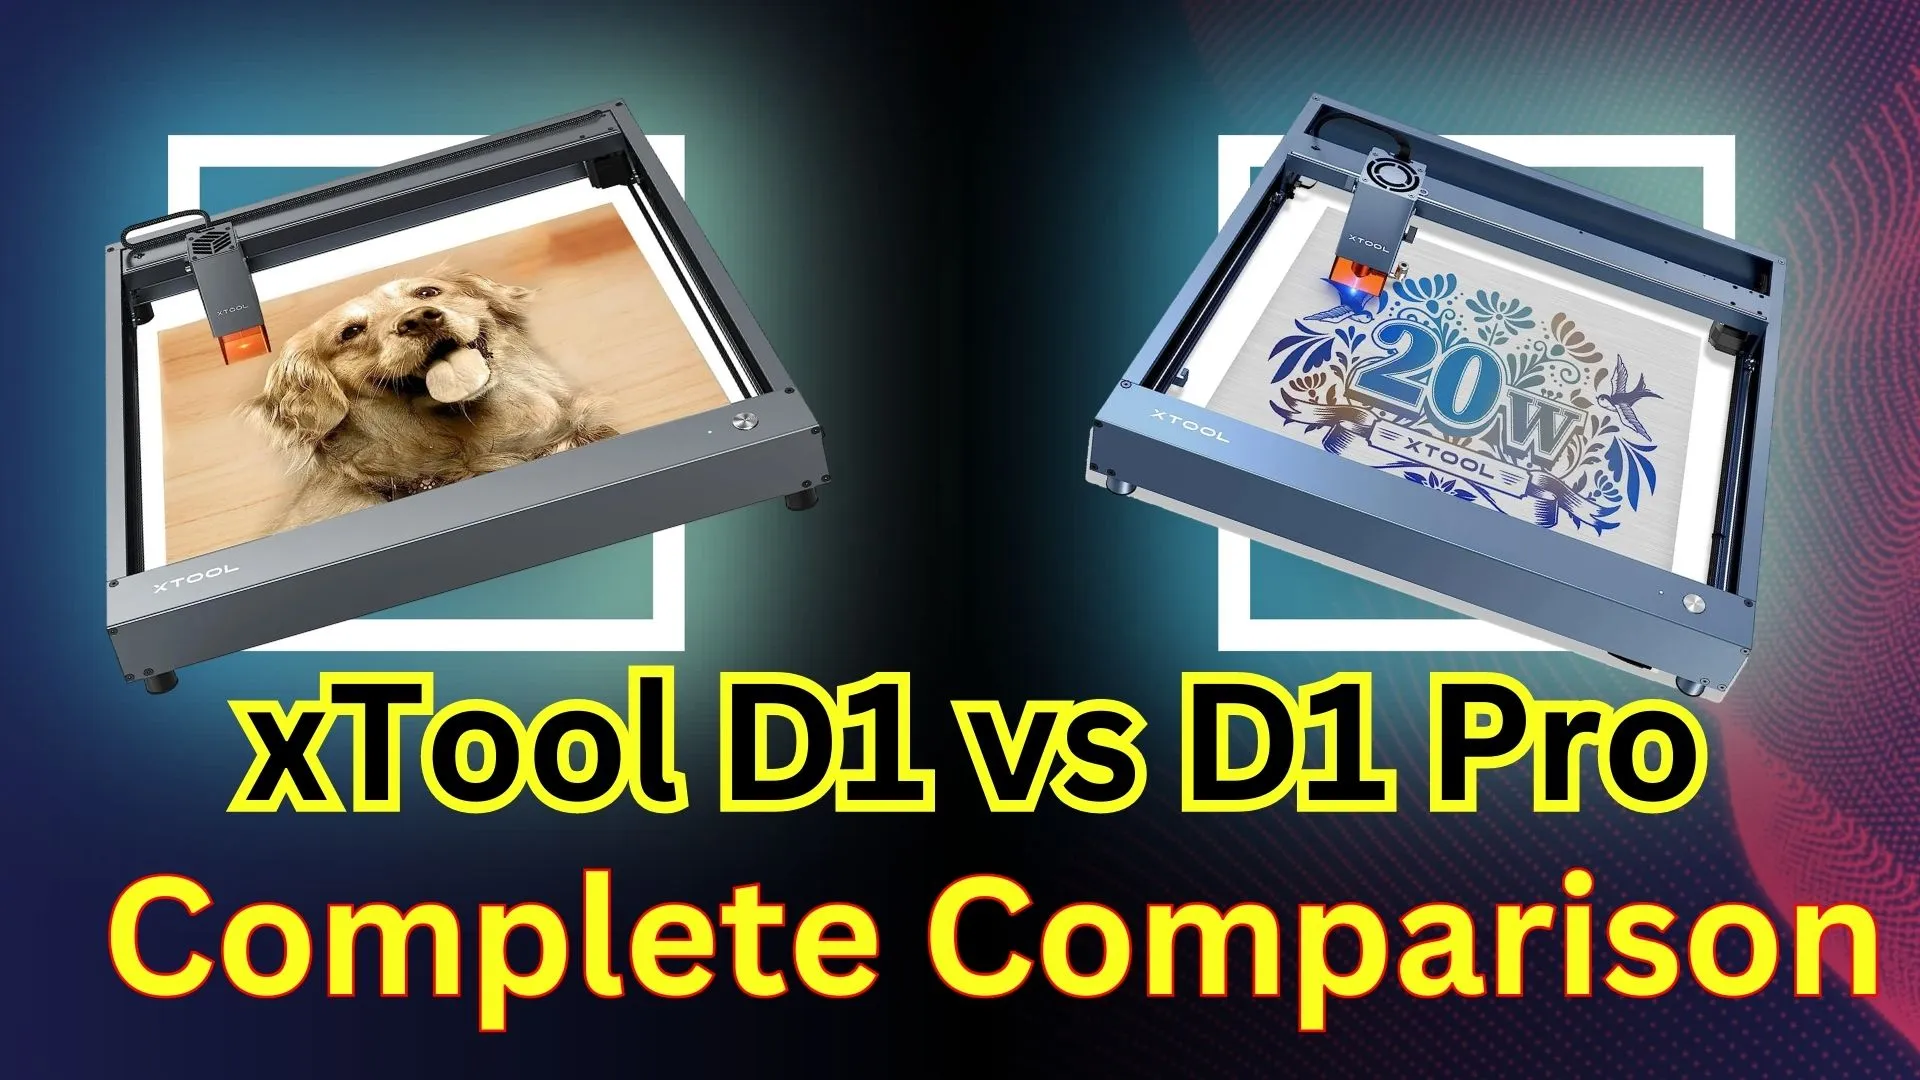 xtool d1 vs xtool d1 pro: Which Should You Buy?